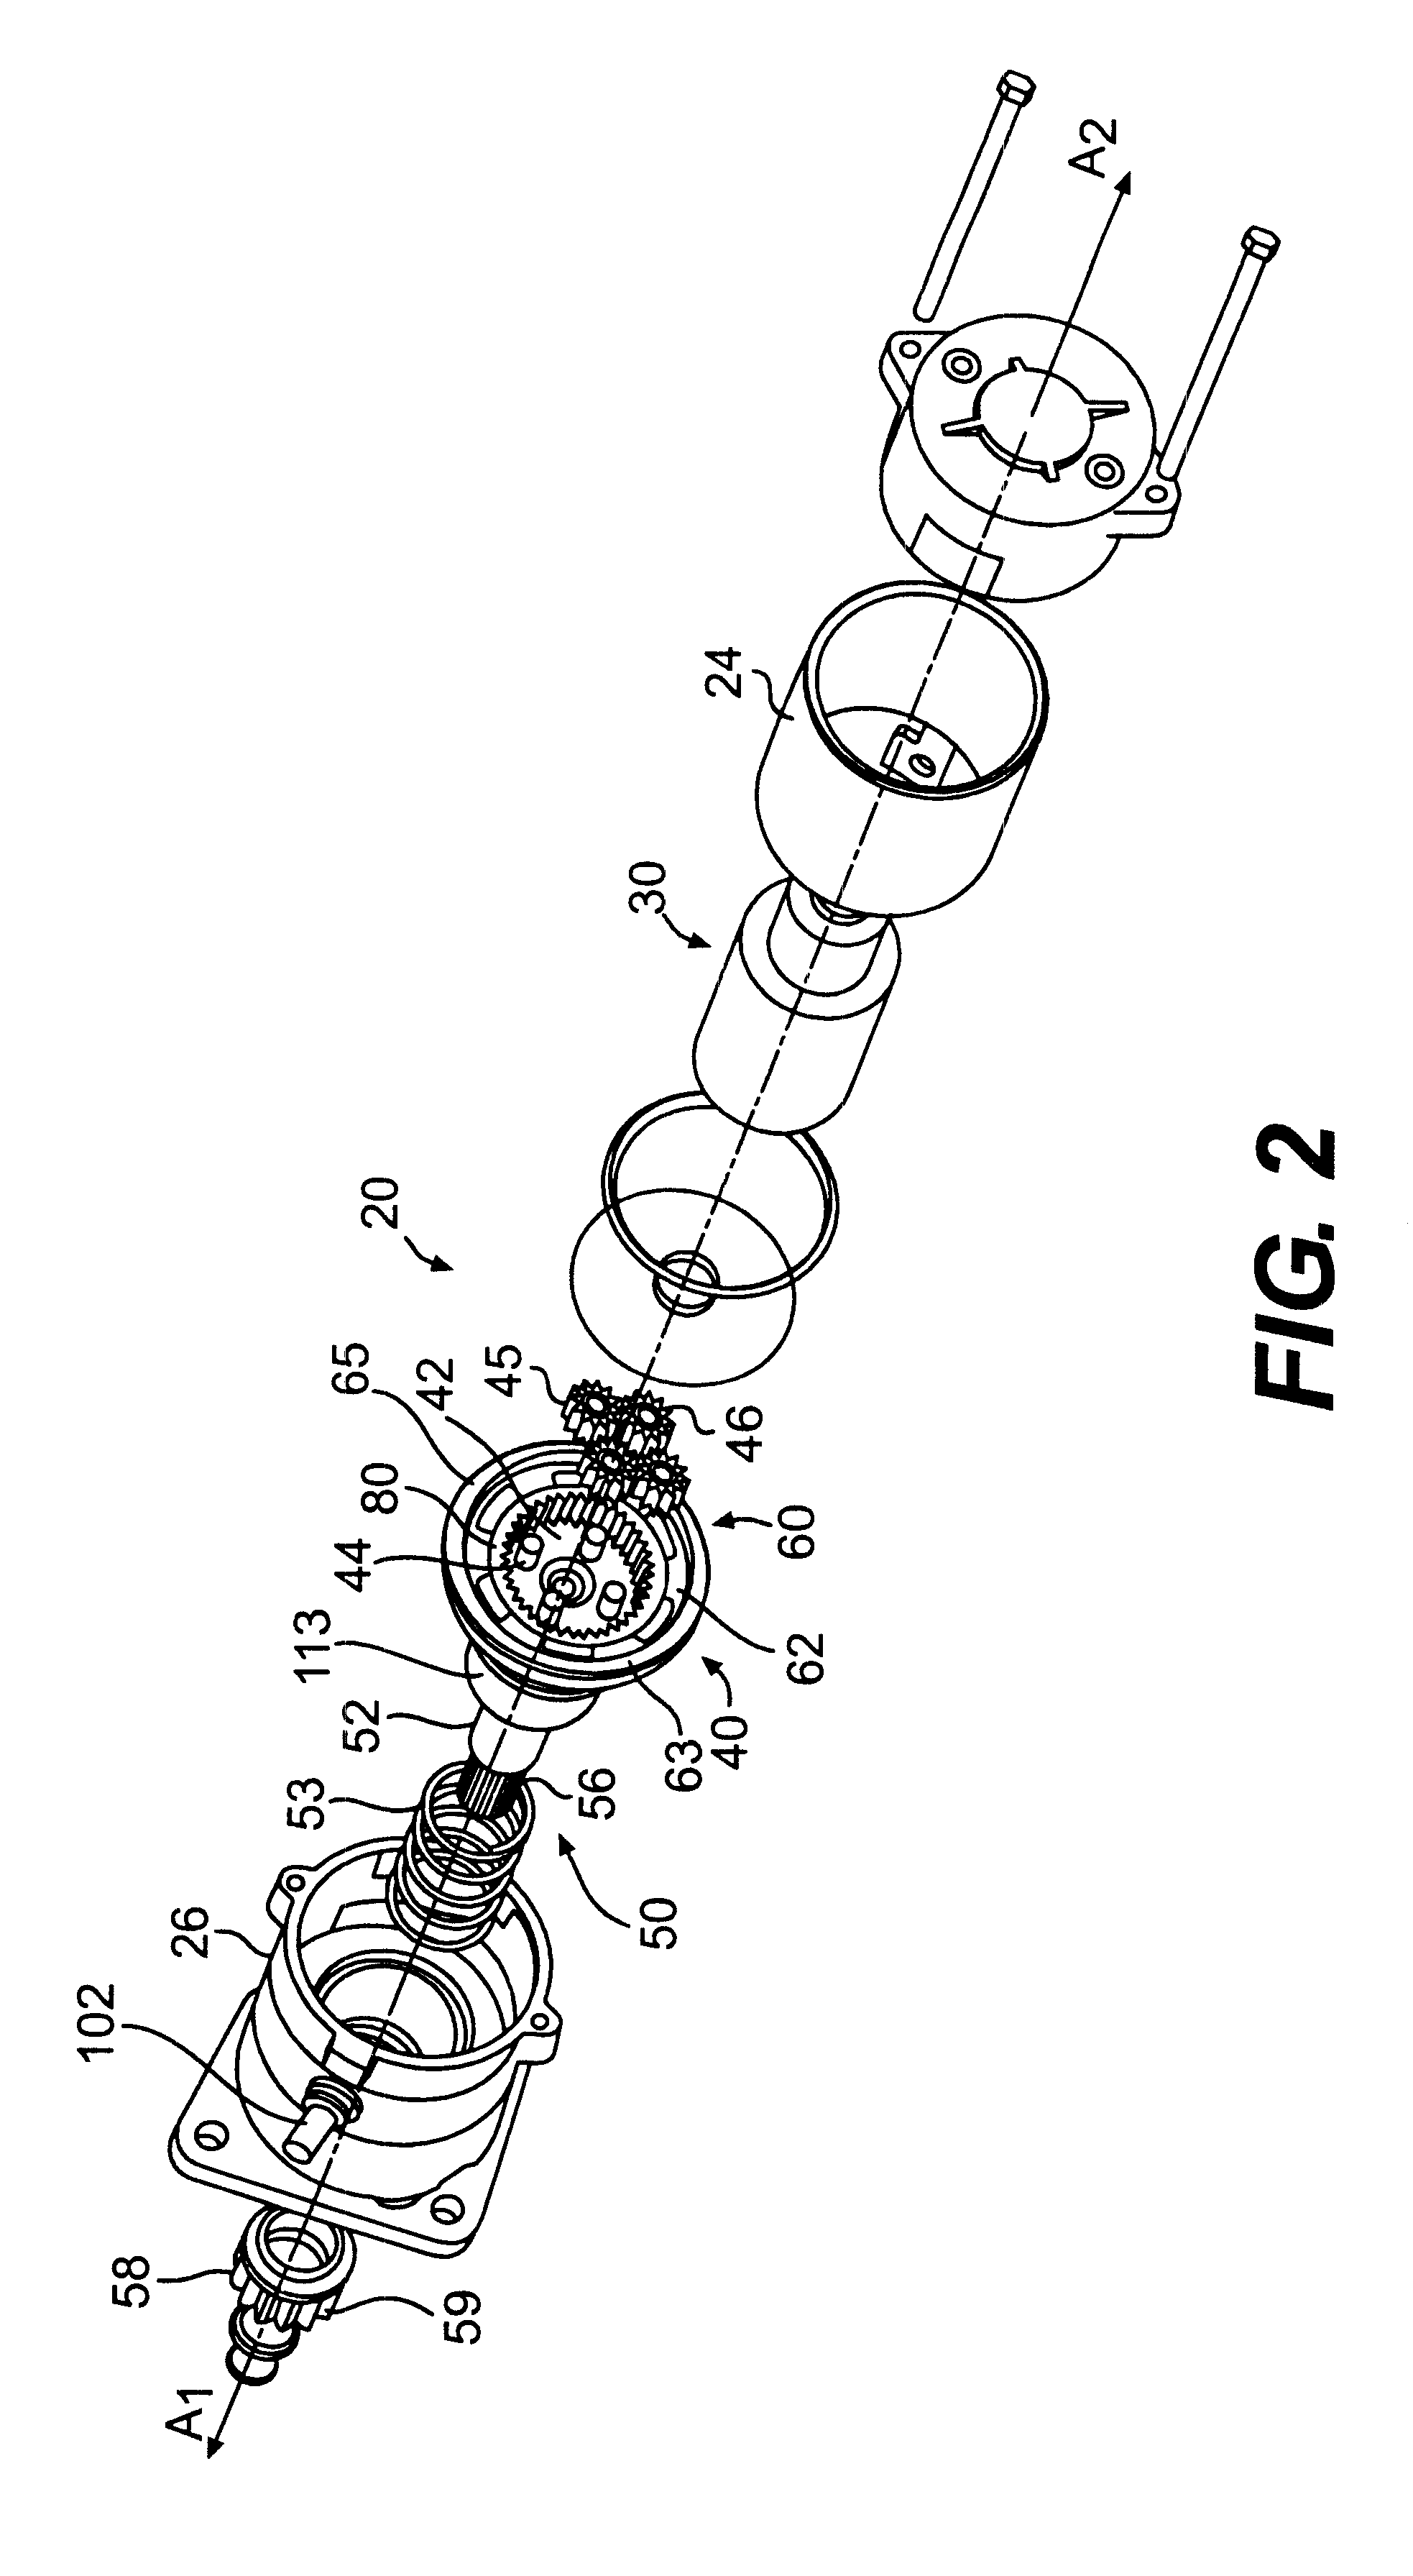 Engagement and disengagement mechanism for a coaxial starter motor assembly